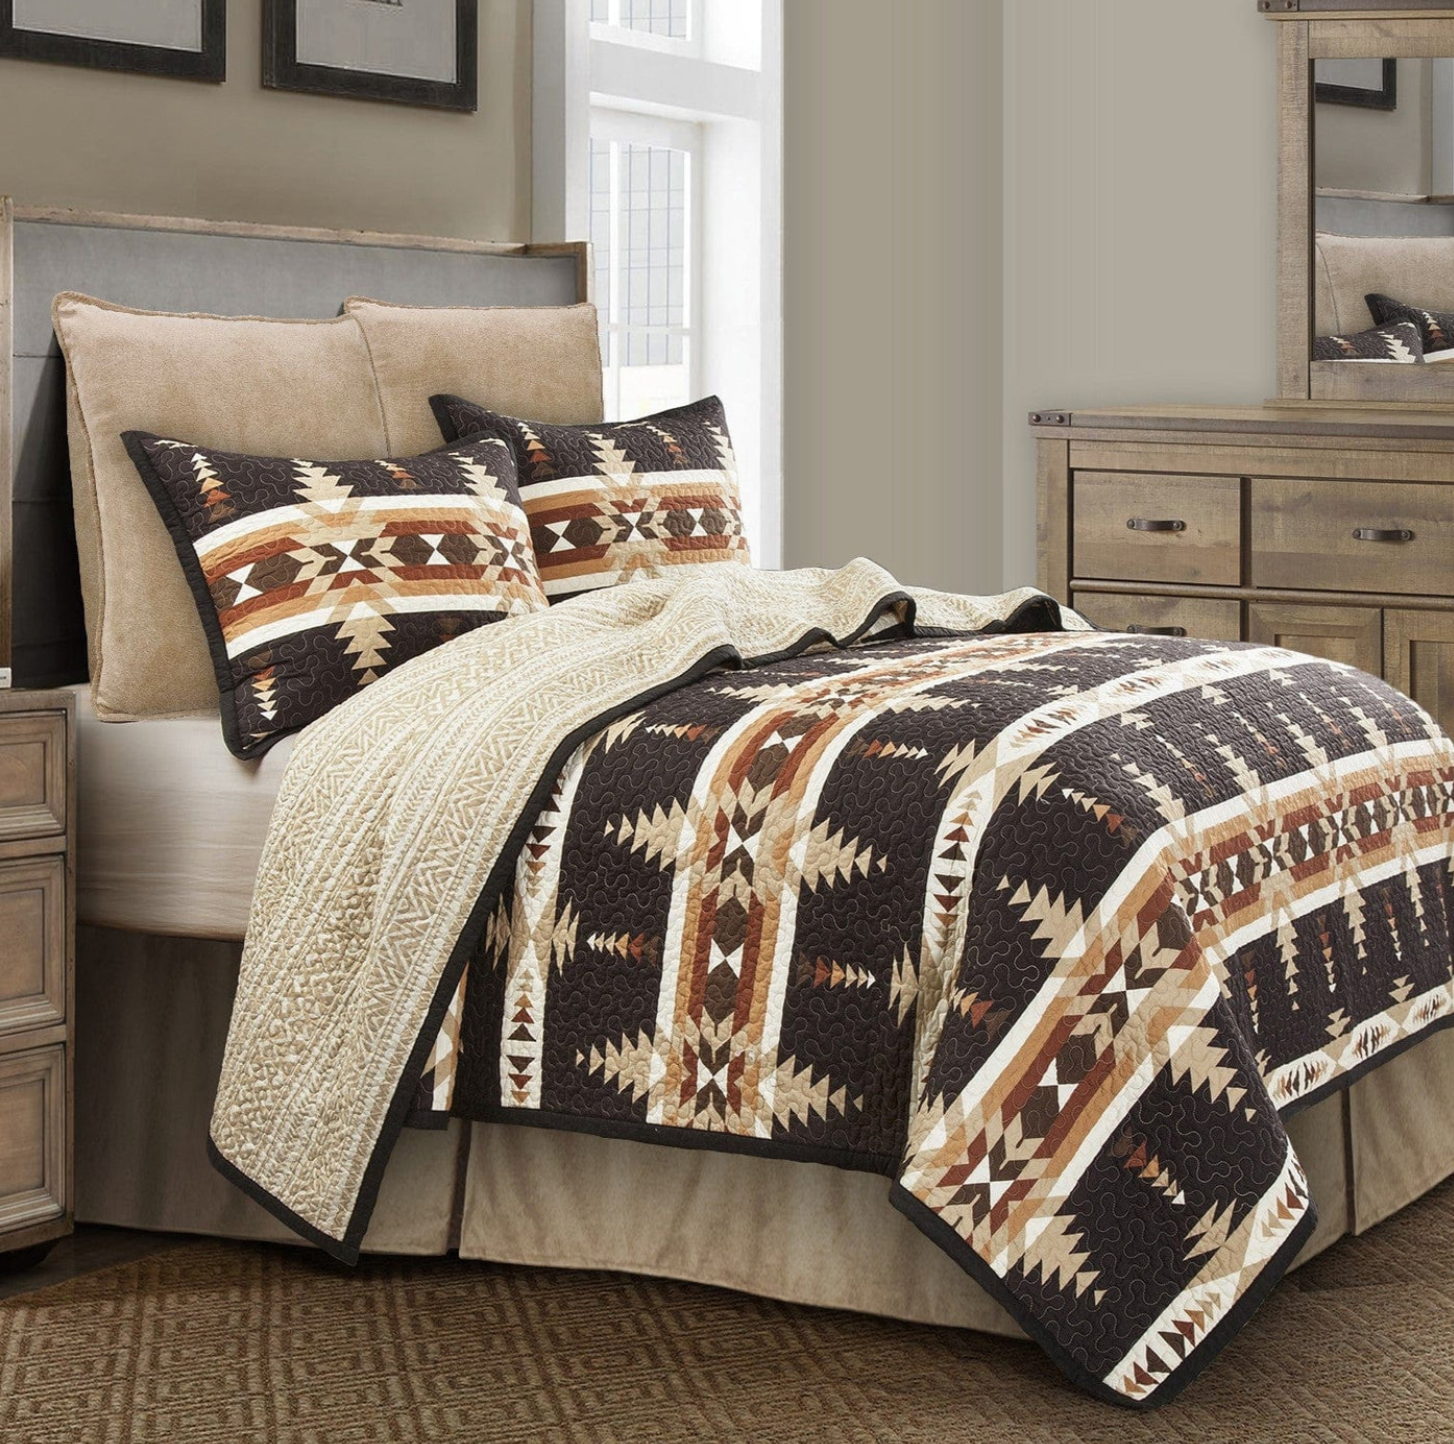 Ranch Life Western Toile Reversible Quilt Set - Cody and Sioux